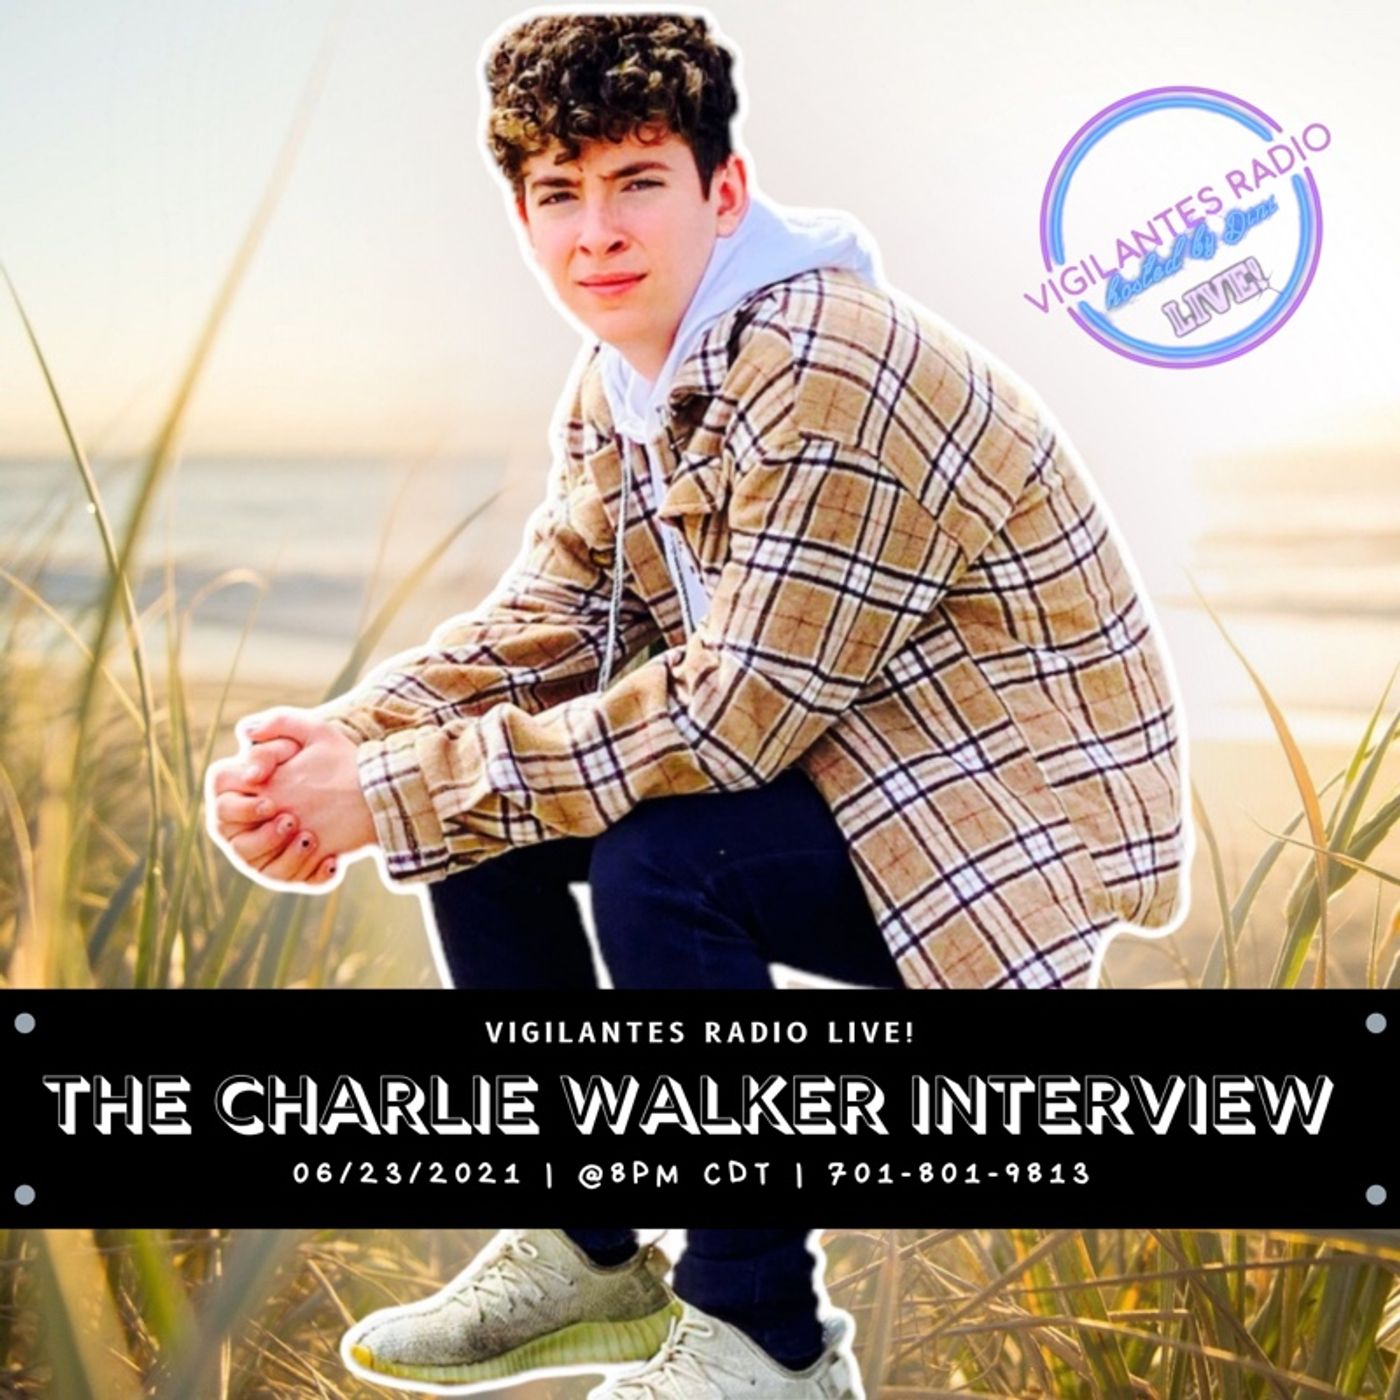 The Charlie Walker Interview. Image